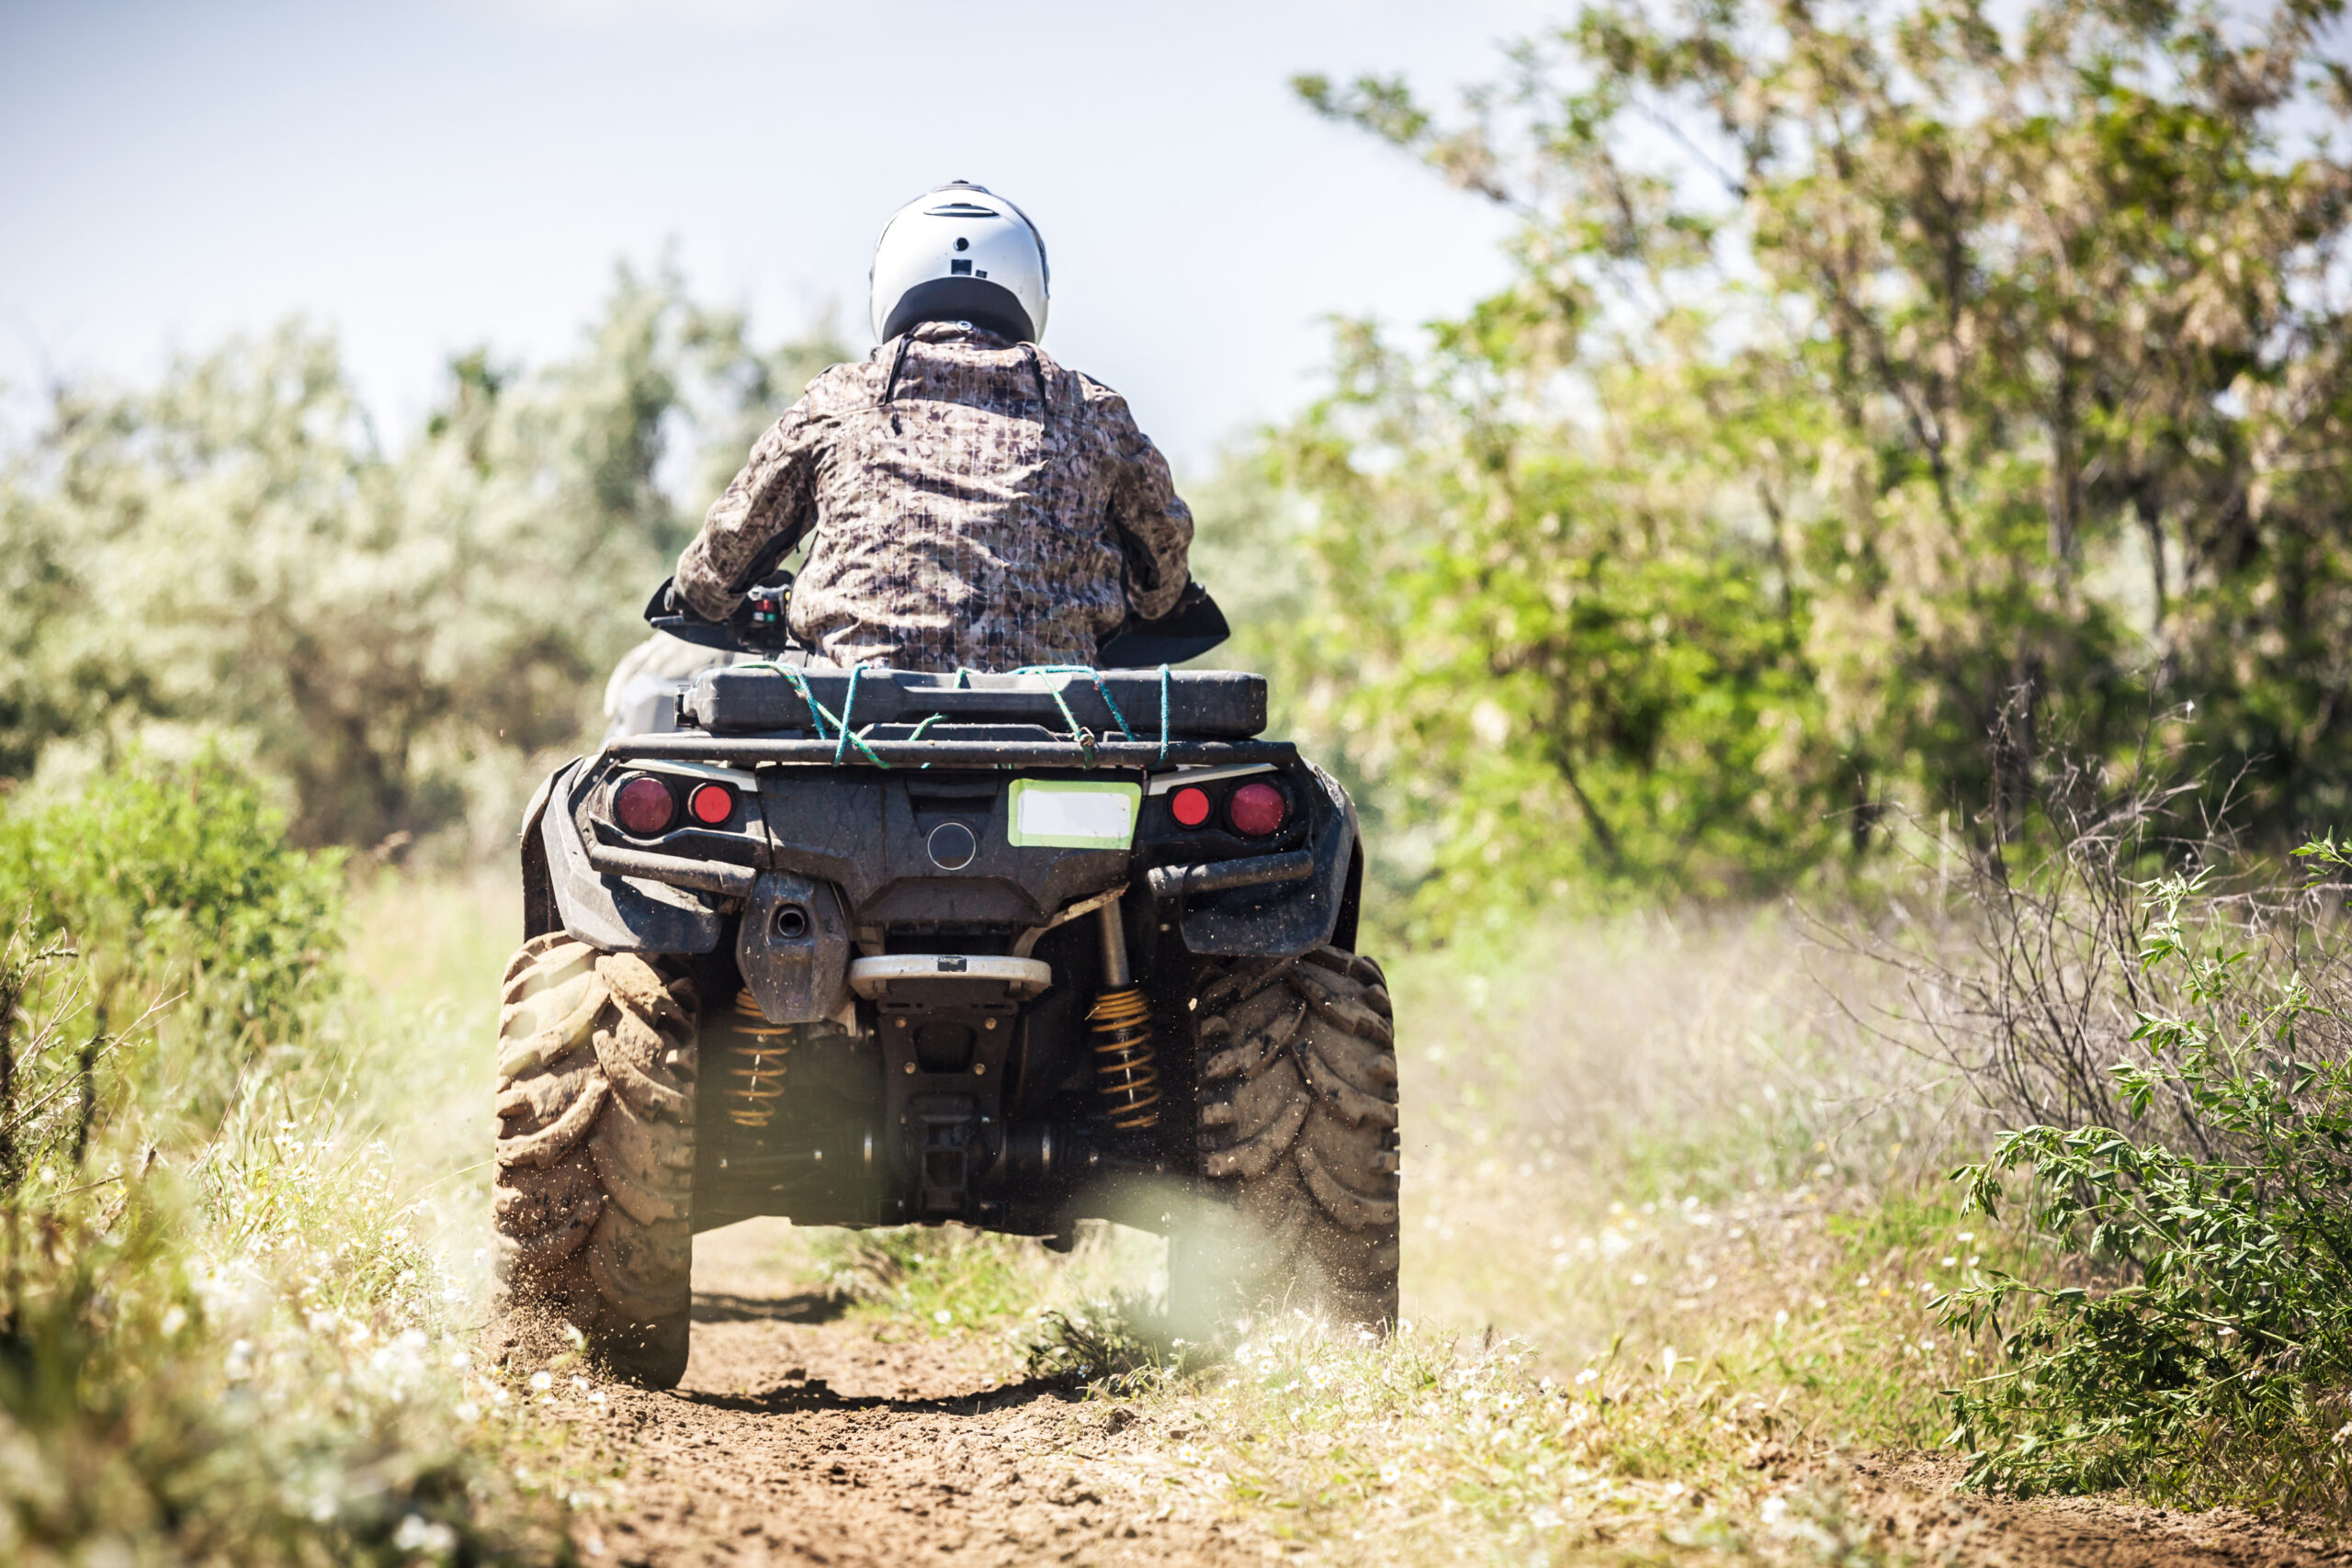 Back view of quad bike zipping along a country road.